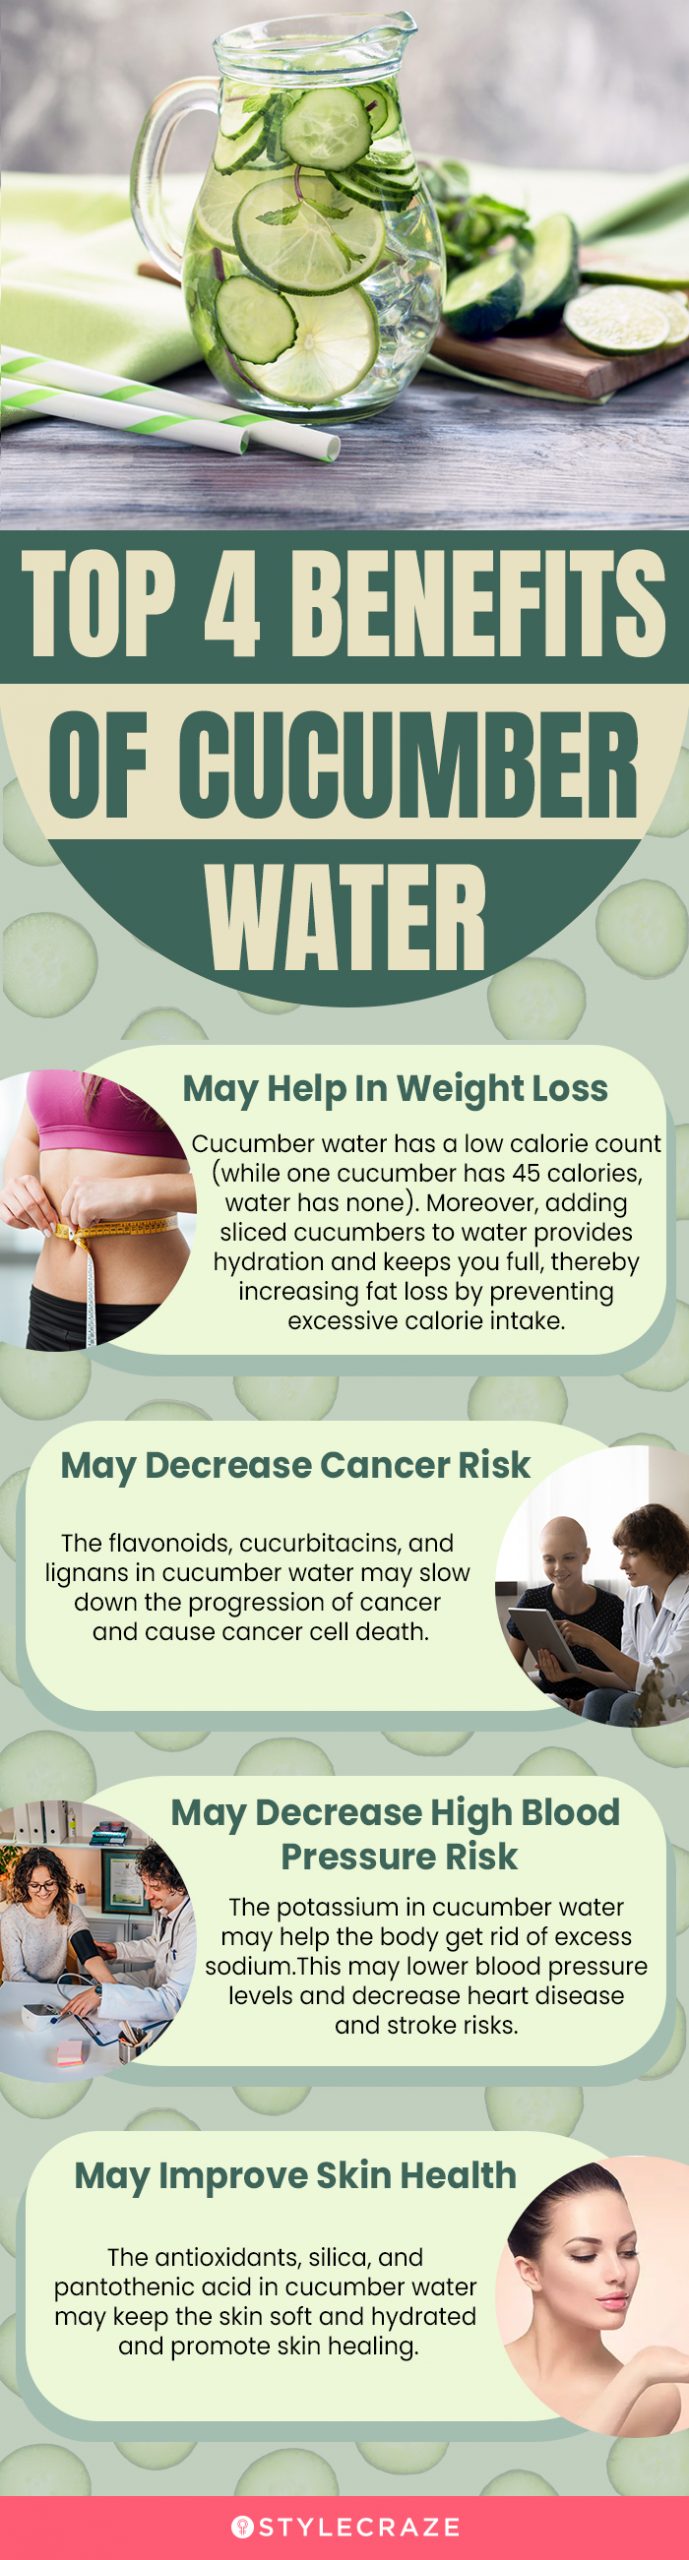 top 4 benefits of cucumber water (infographic)